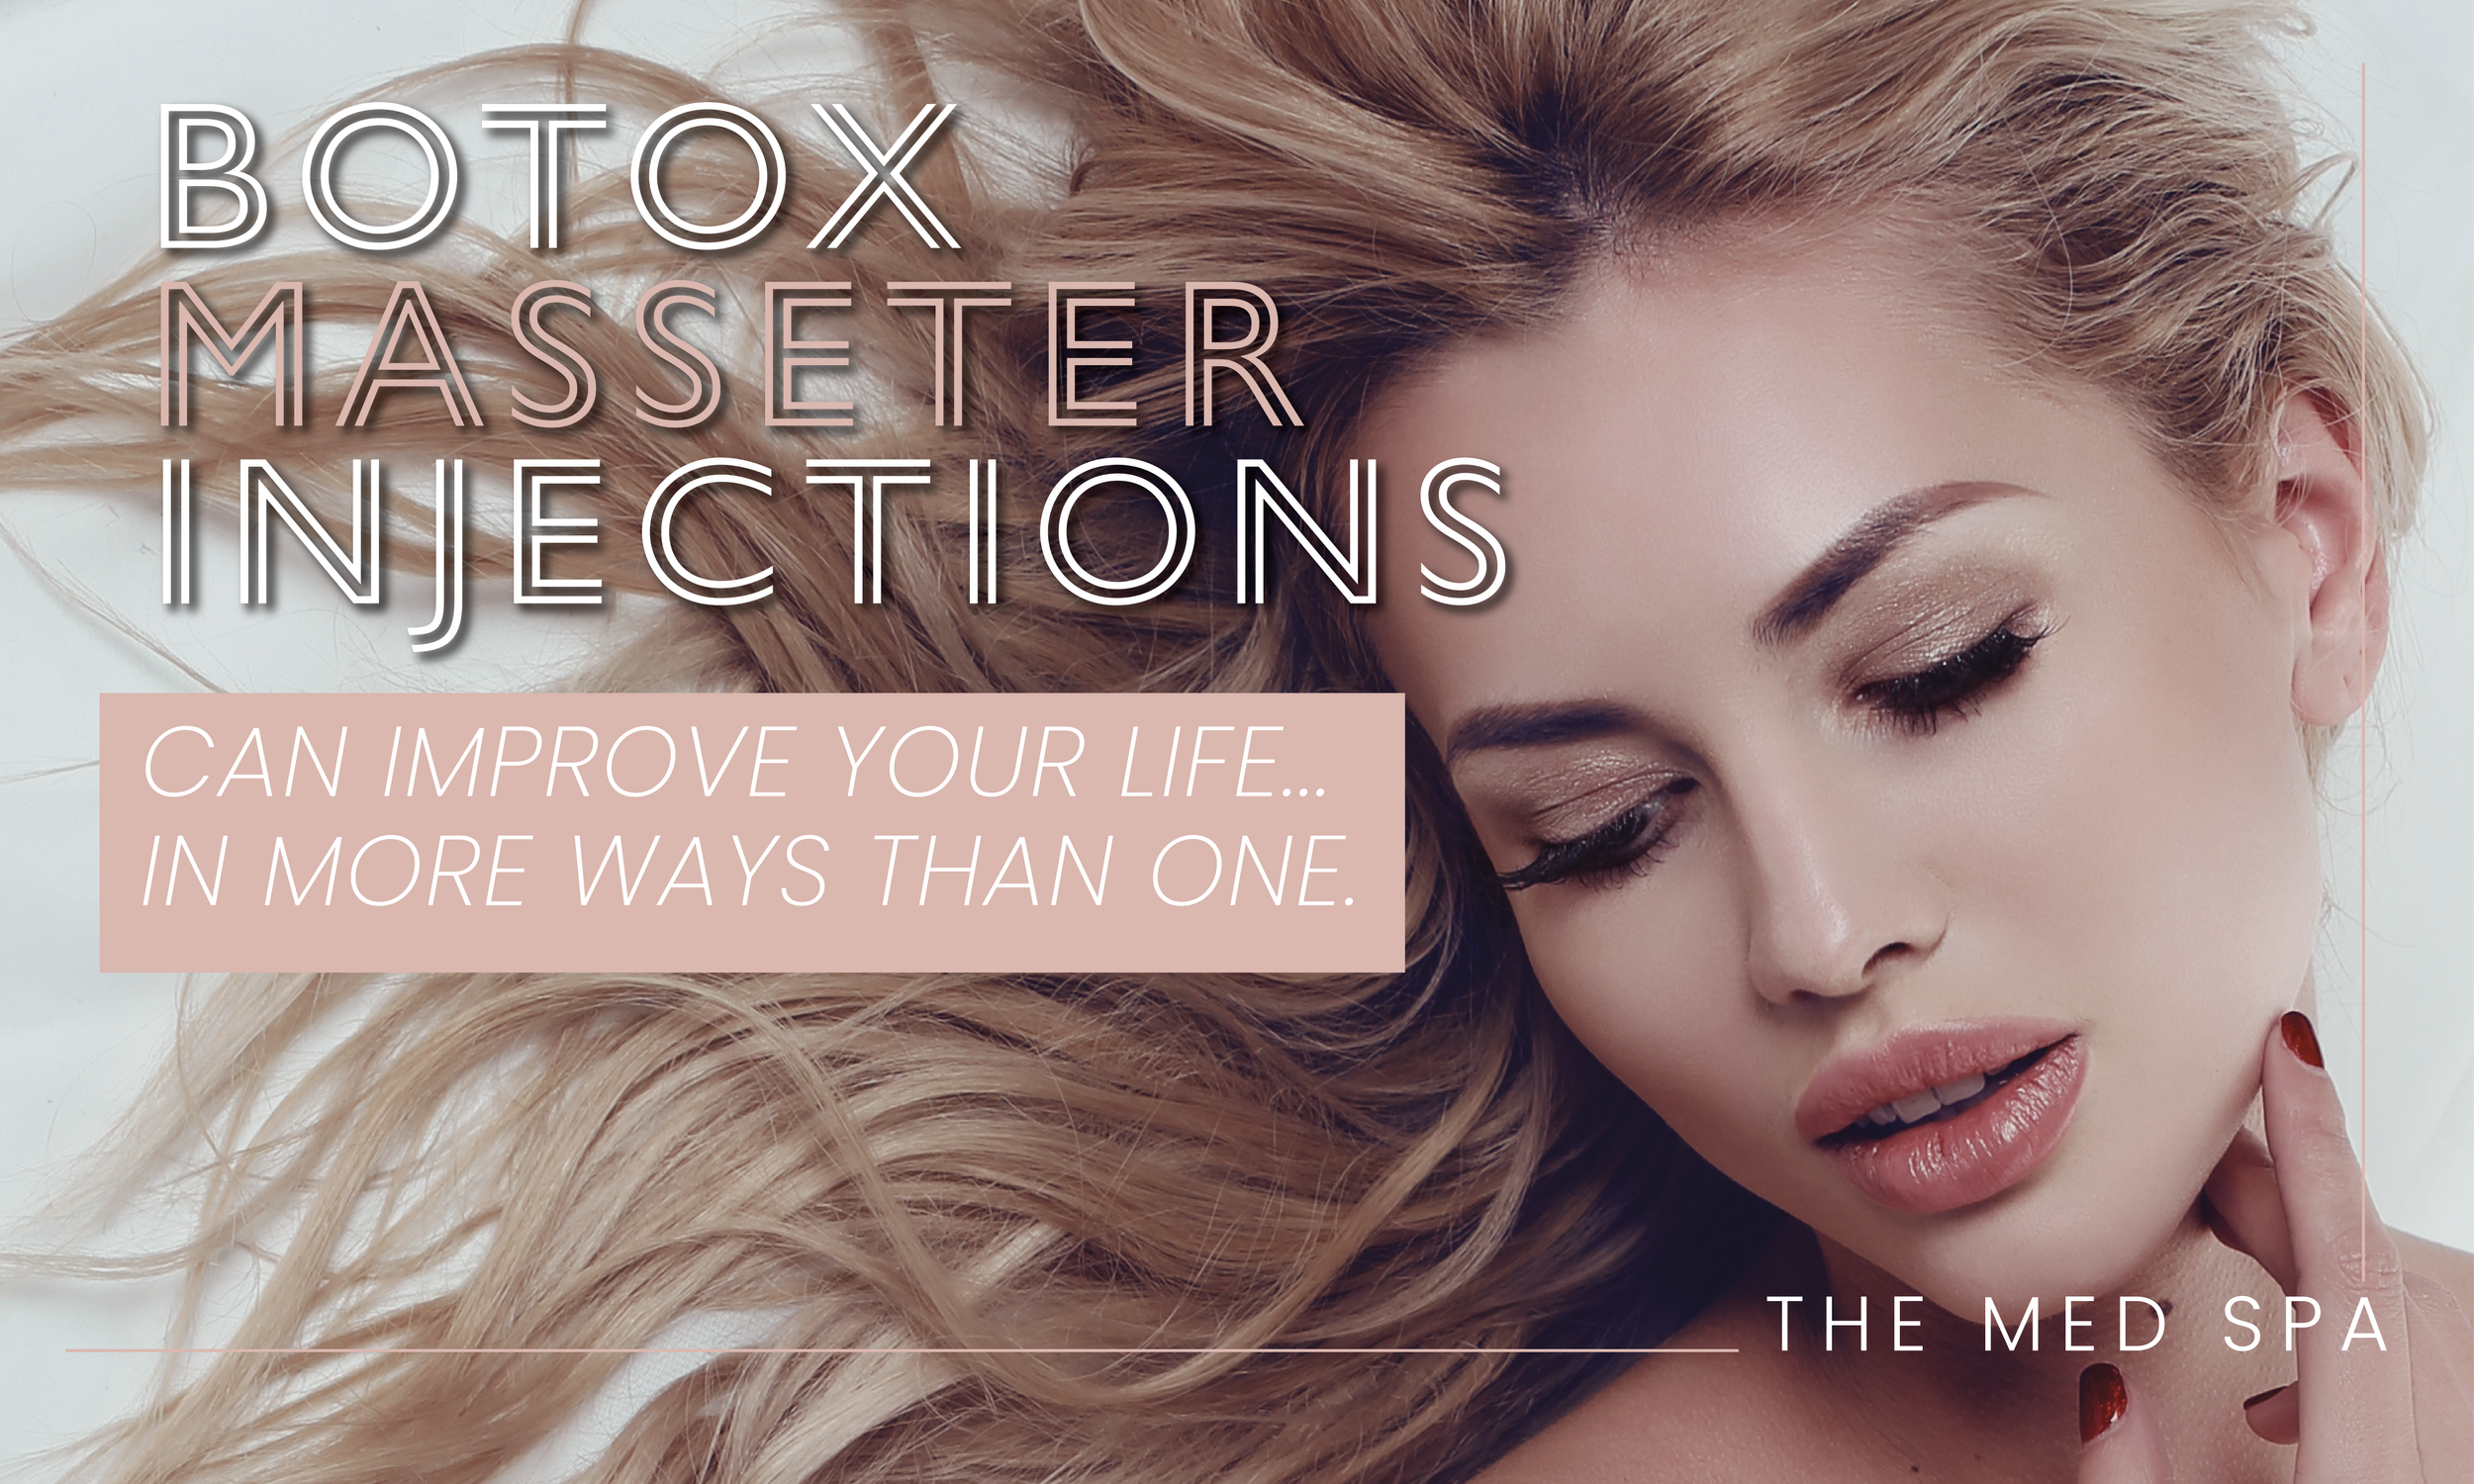 Can Botox Masseter Injections Improve Your Sex Life? — THE MED